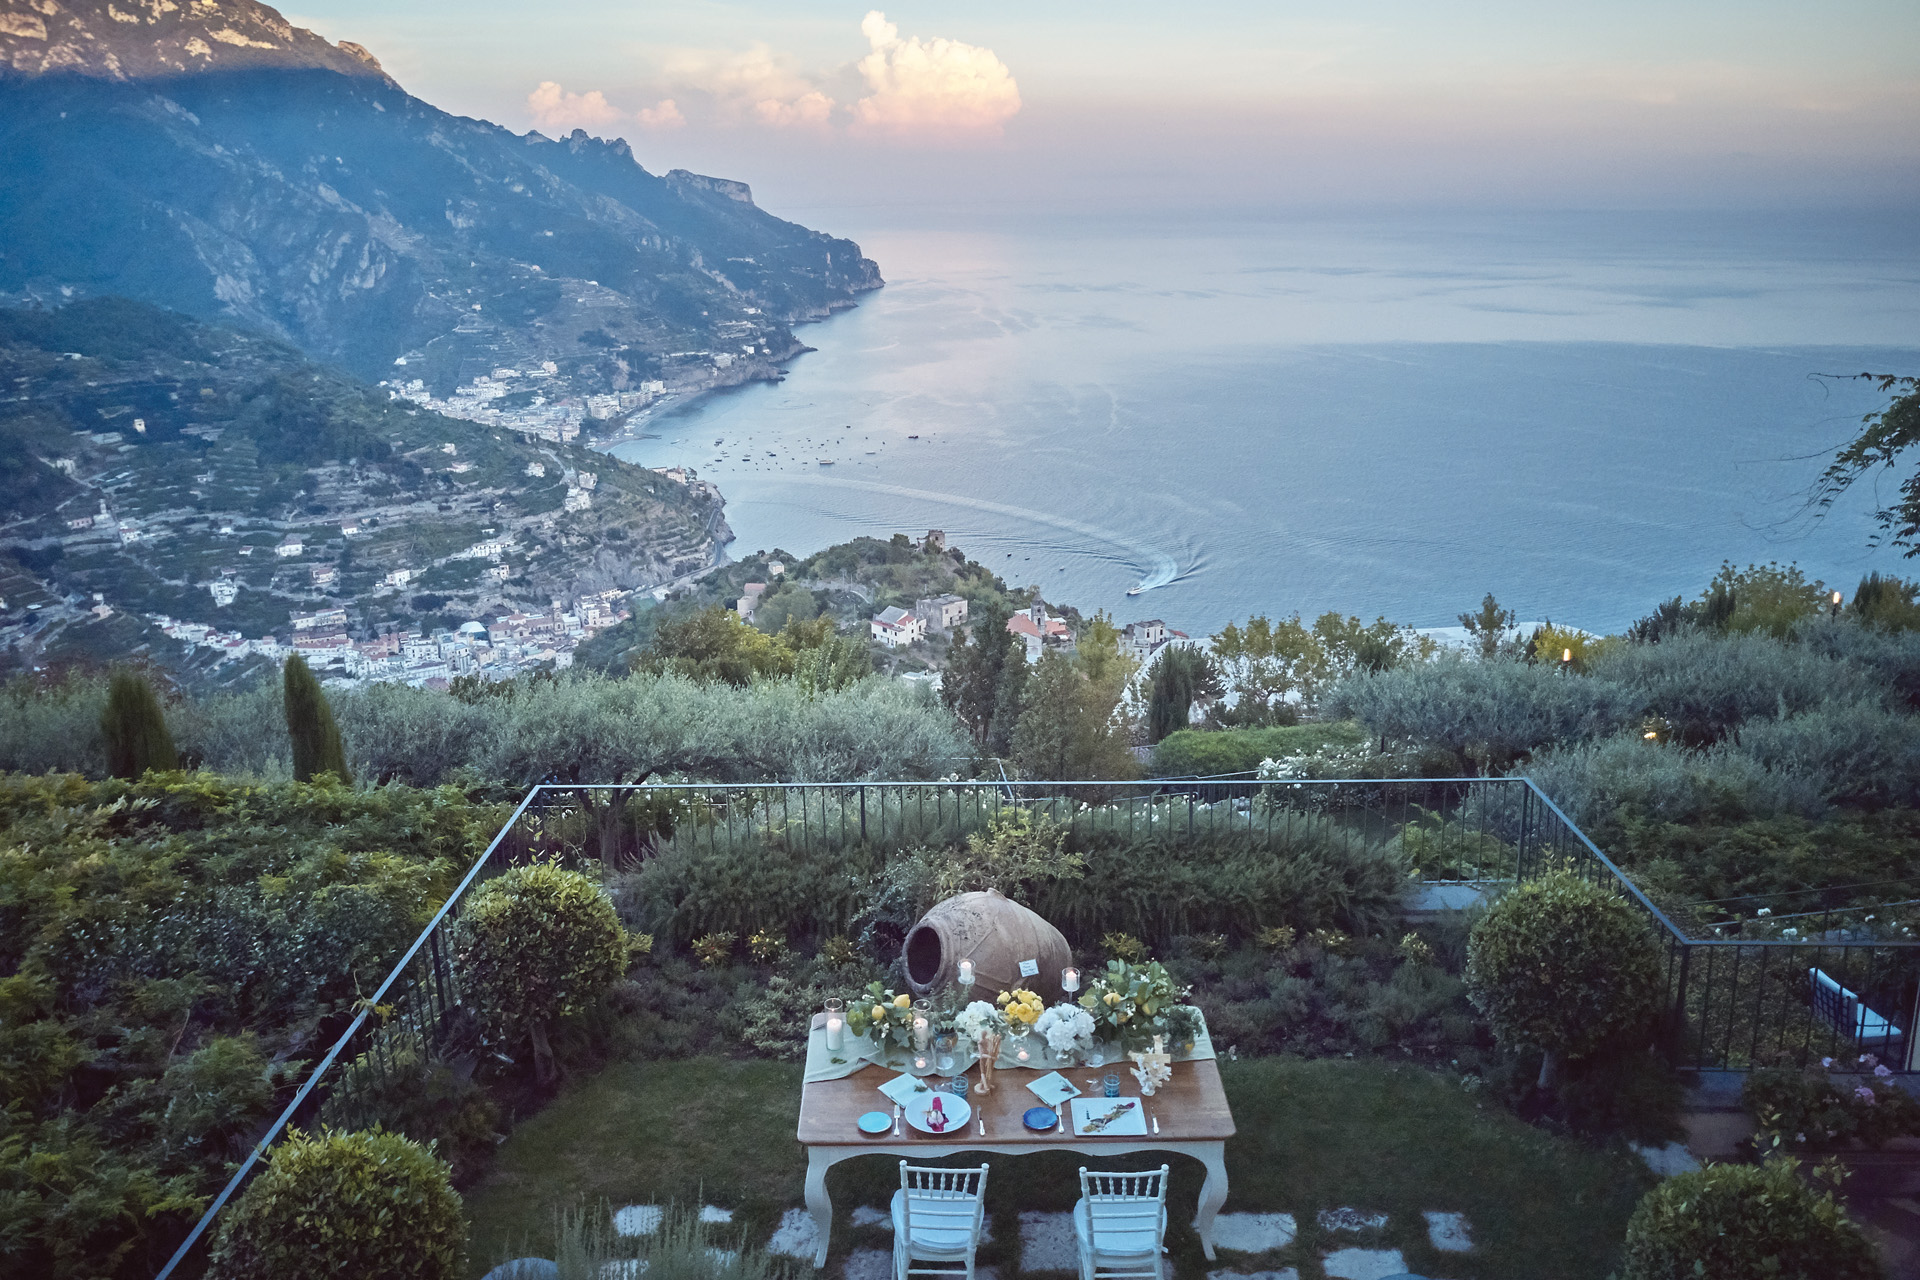 Belmond Hotel Caruso, one of the best luxury hotels on the Amalfi Coast in  Ravello 